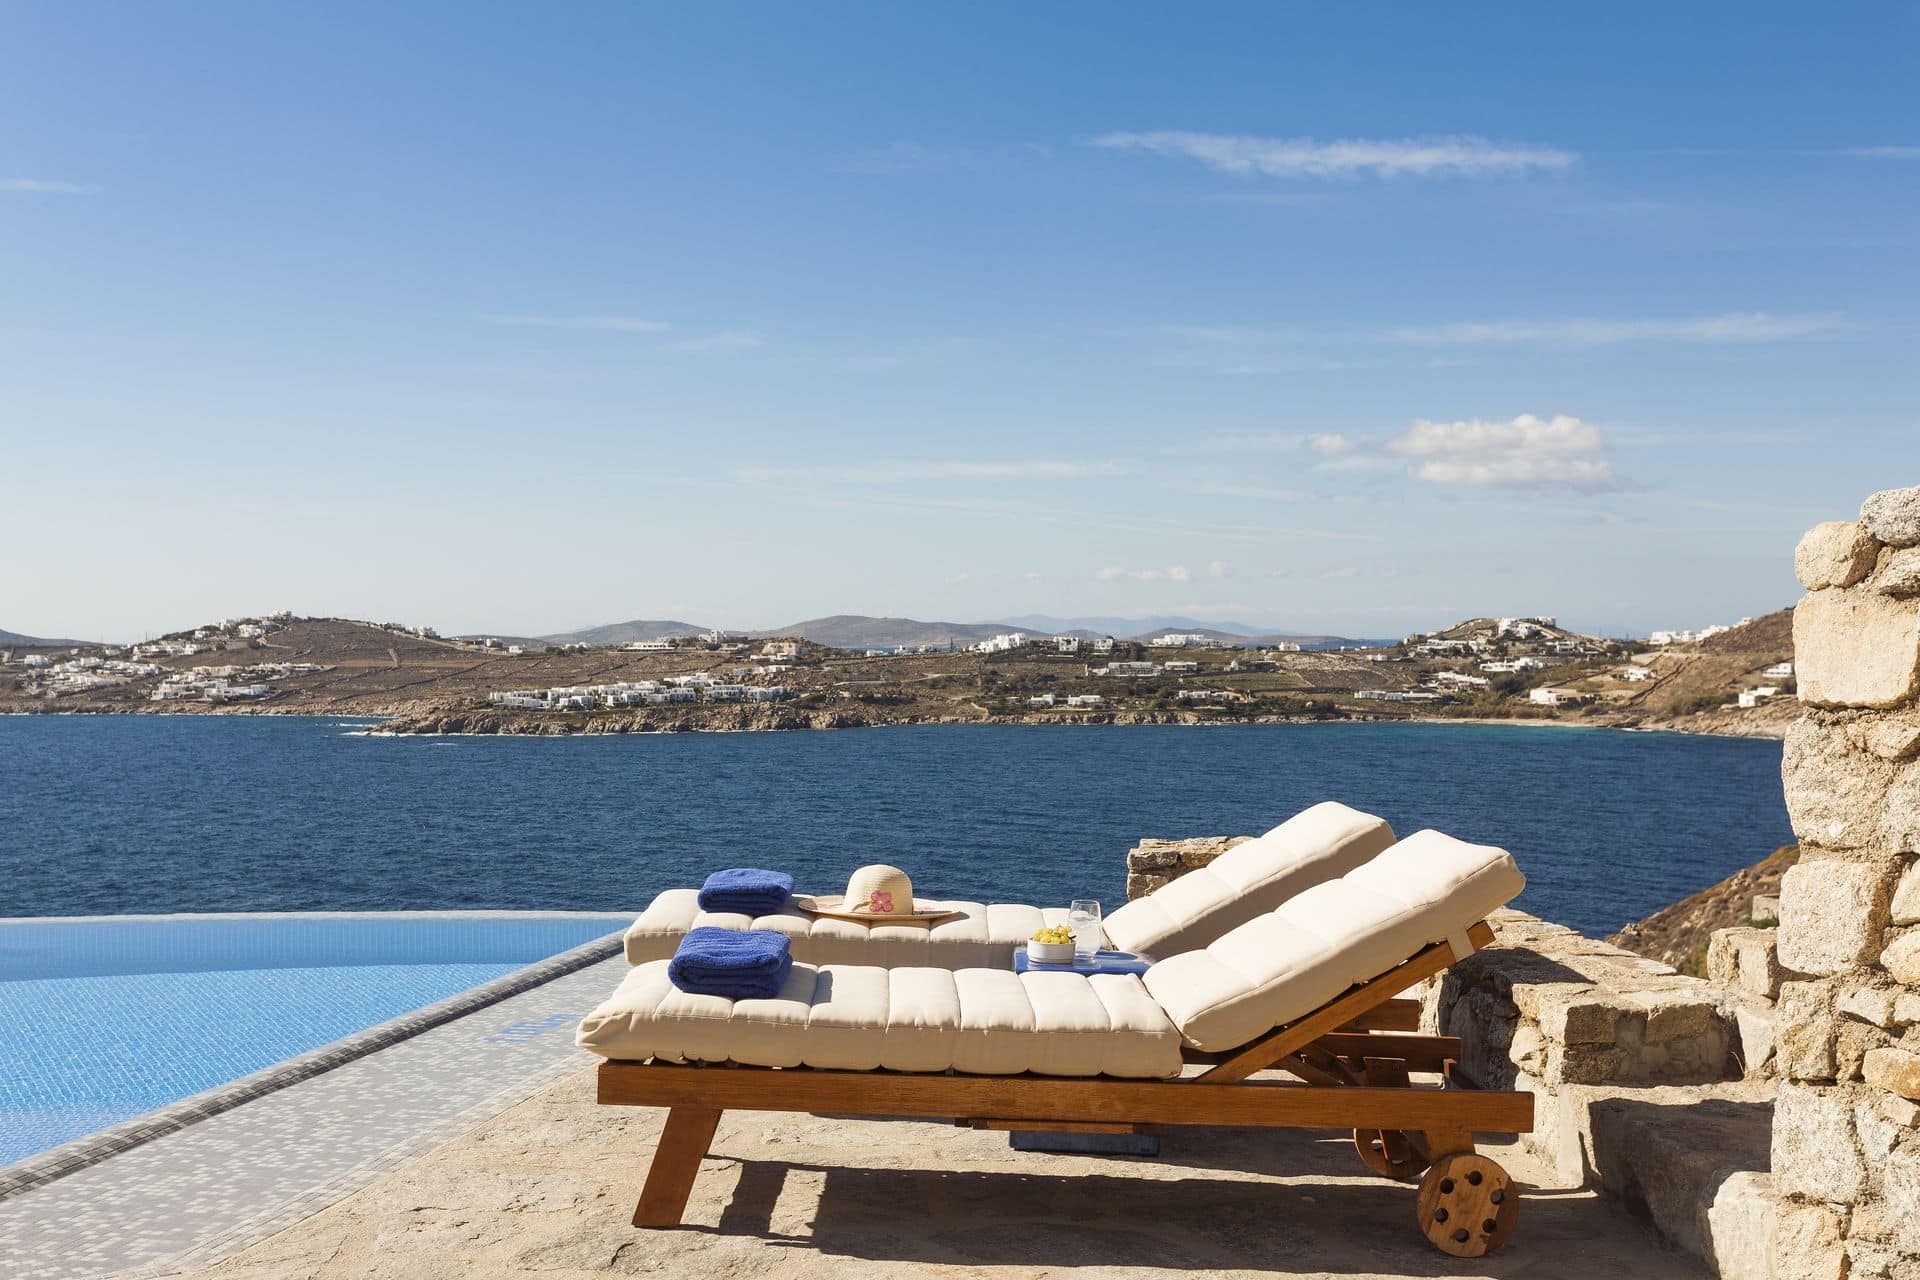 Mornings around the infinity pool during villa holidays in Mykonos with AGL overlooking the sea and Mykonos town in the background.